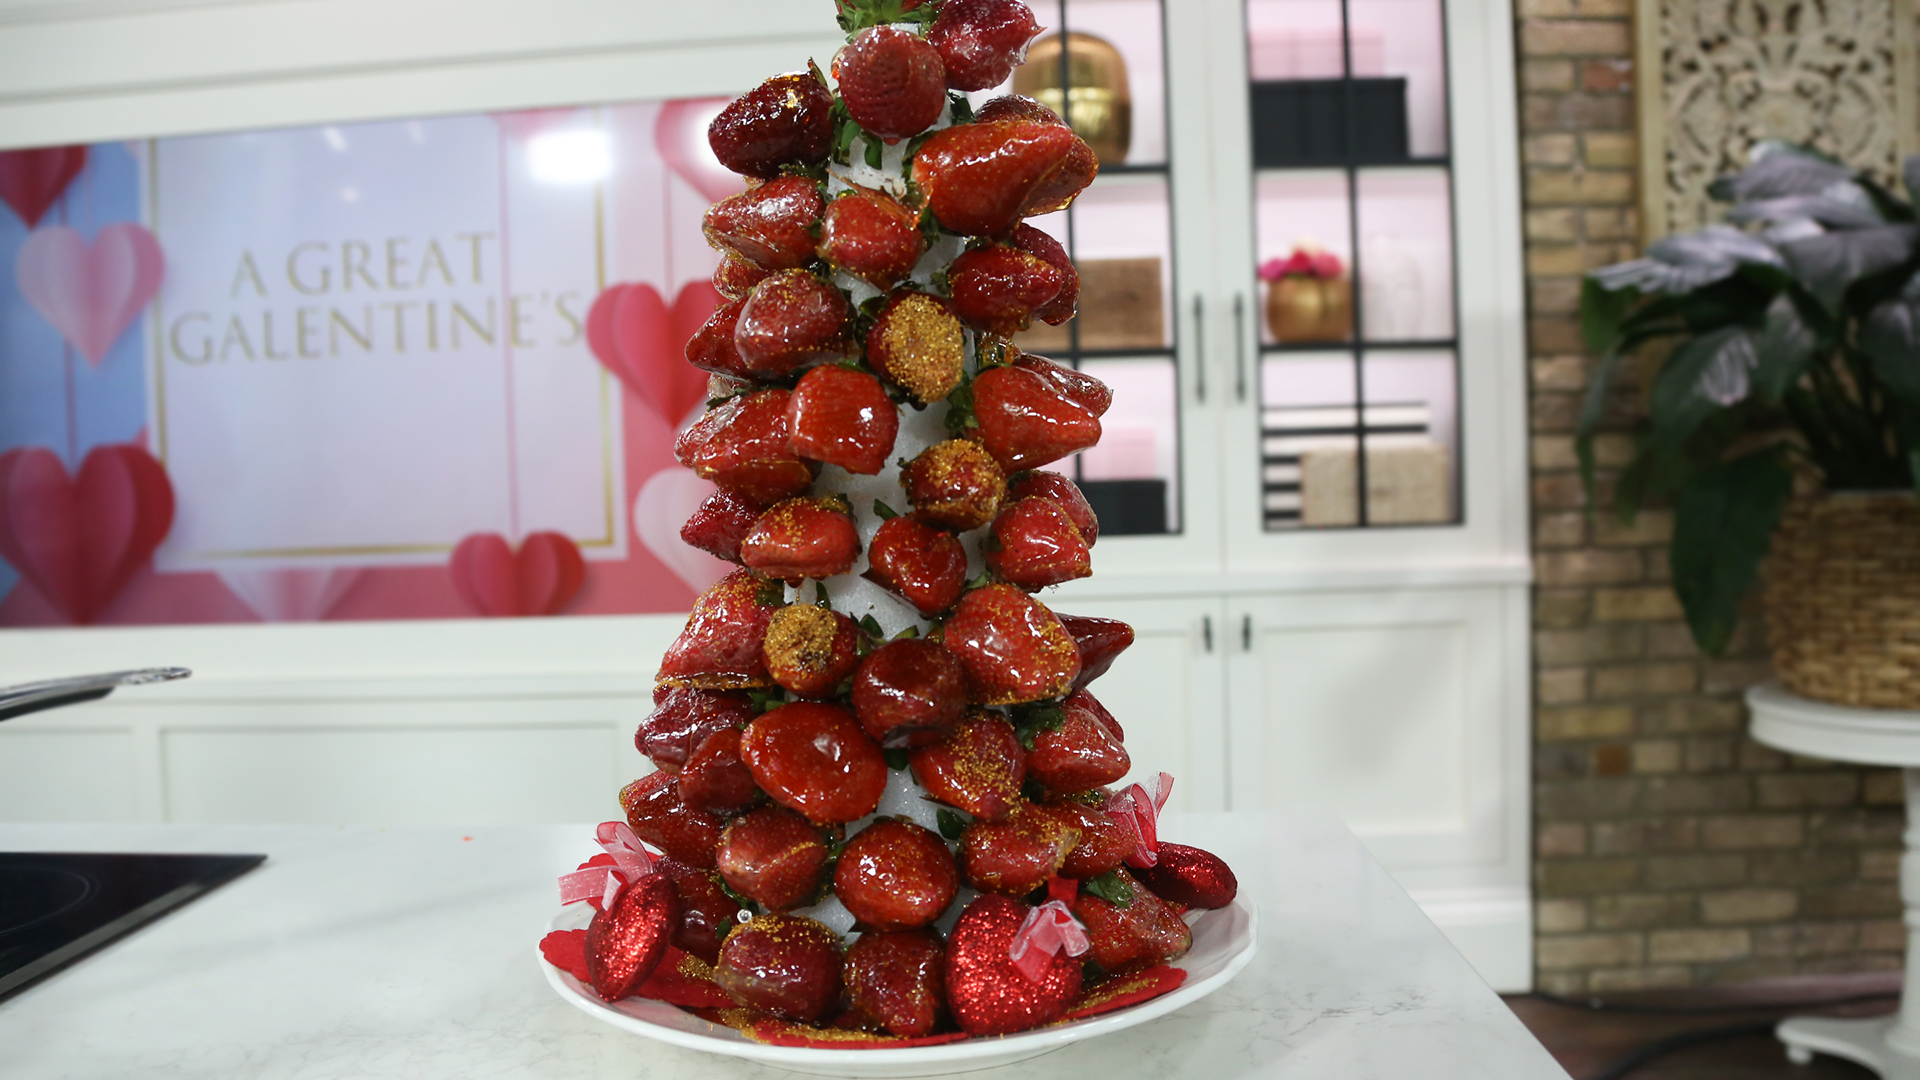 Candied strawberry tower